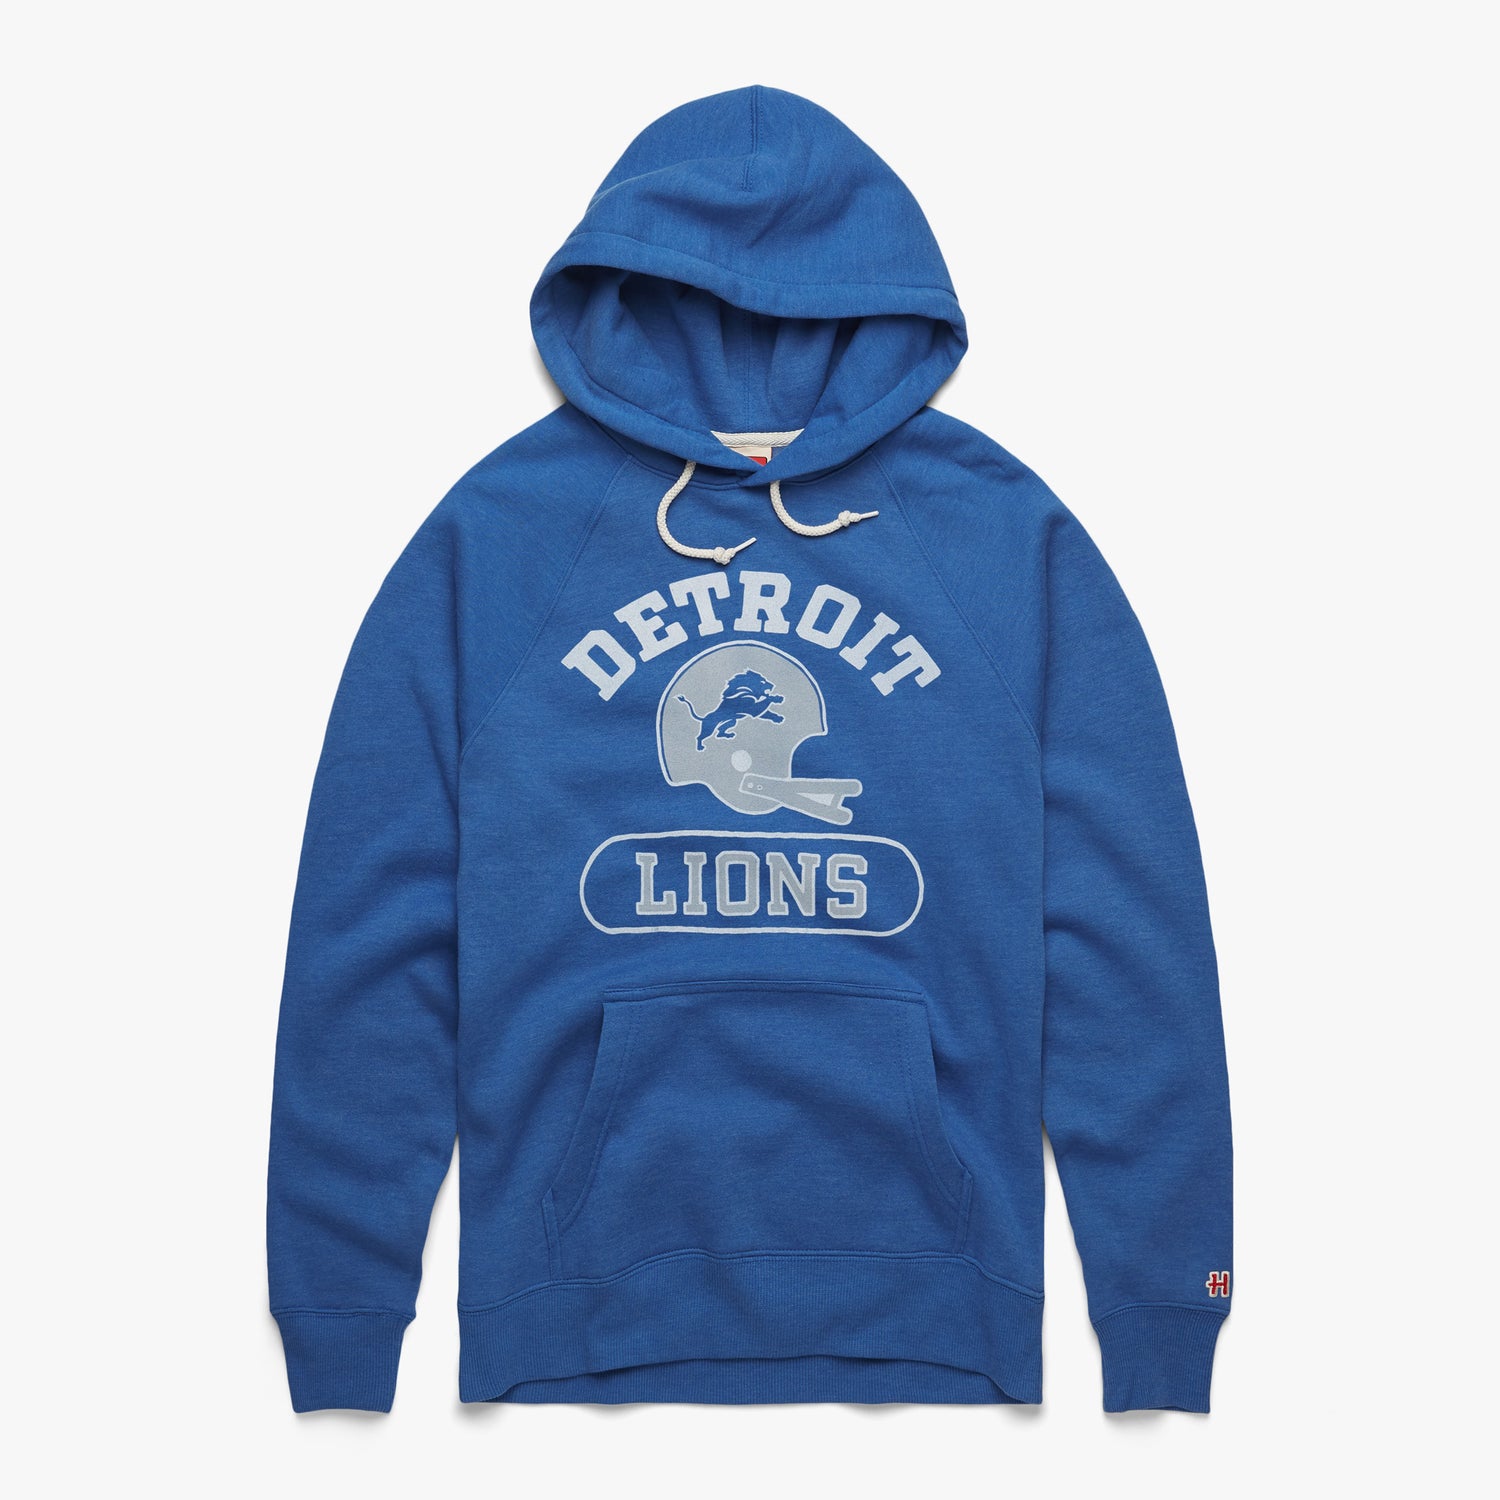 Detroit Lions Throwback Helmet Hoodie from Homage. | Officially Licensed Vintage NFL Apparel from Homage Pro Shop.